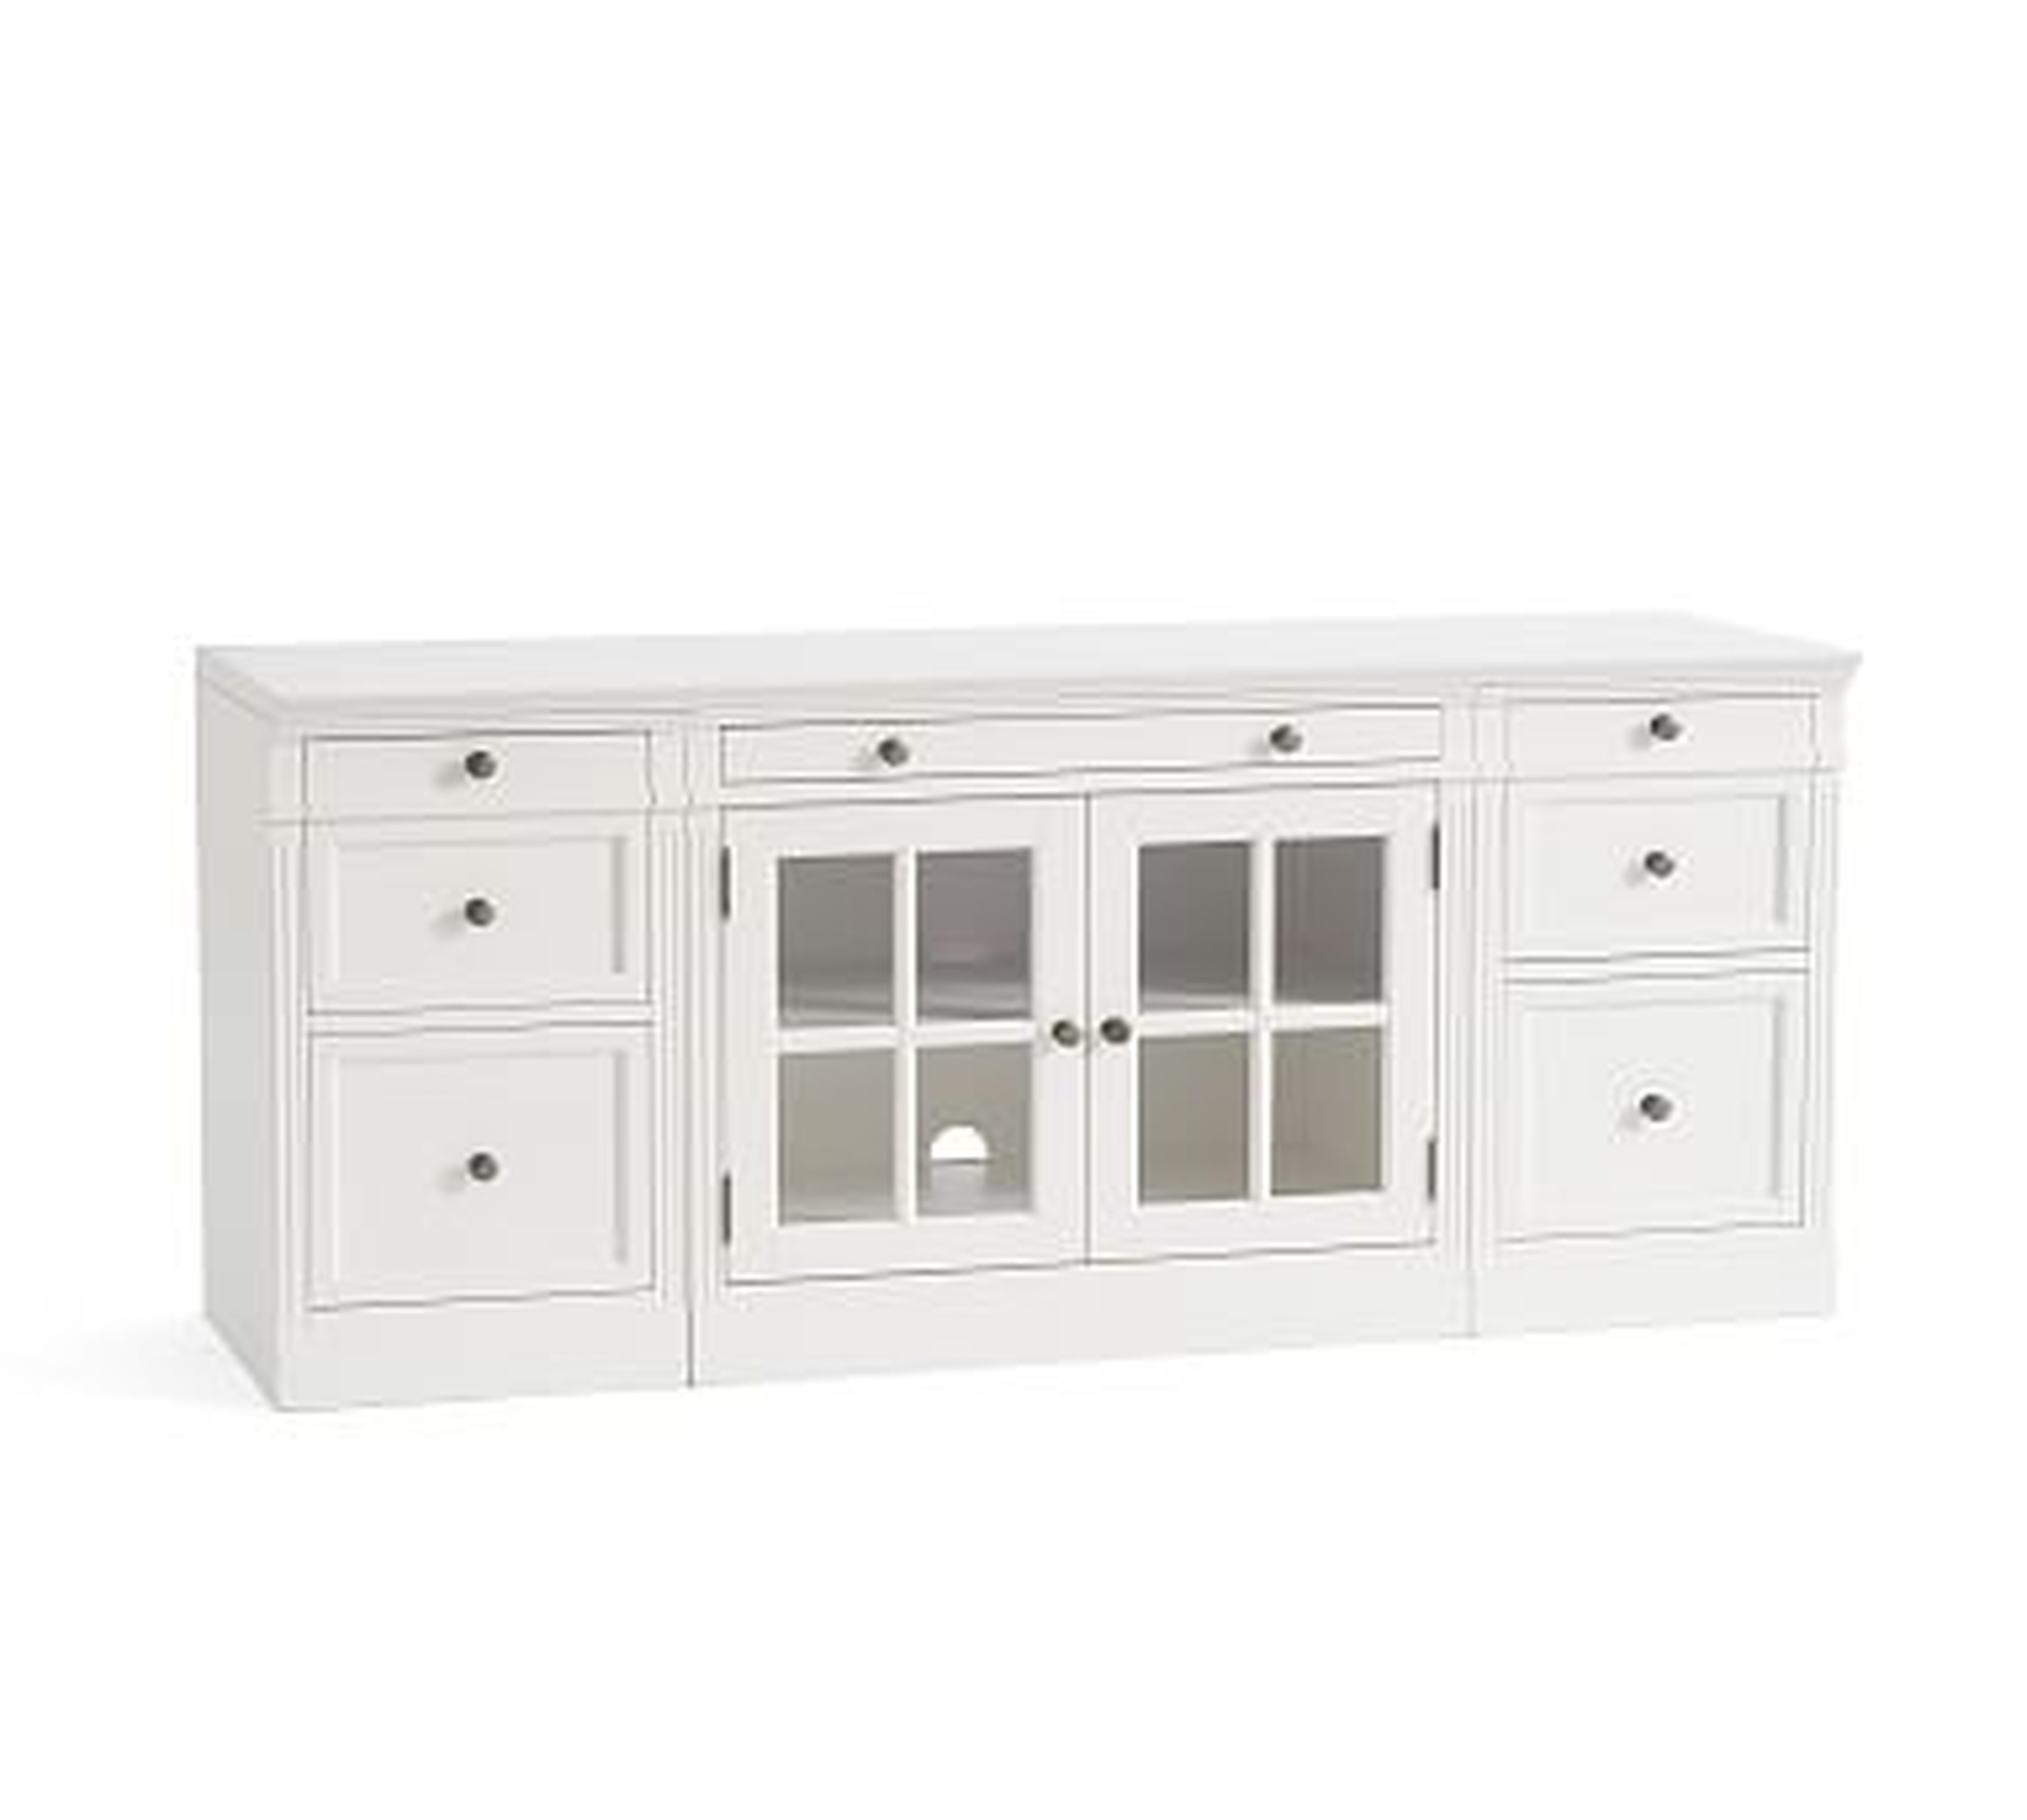 Livingston 70" Media Console With File Cabinets, Montauk White - Pottery Barn